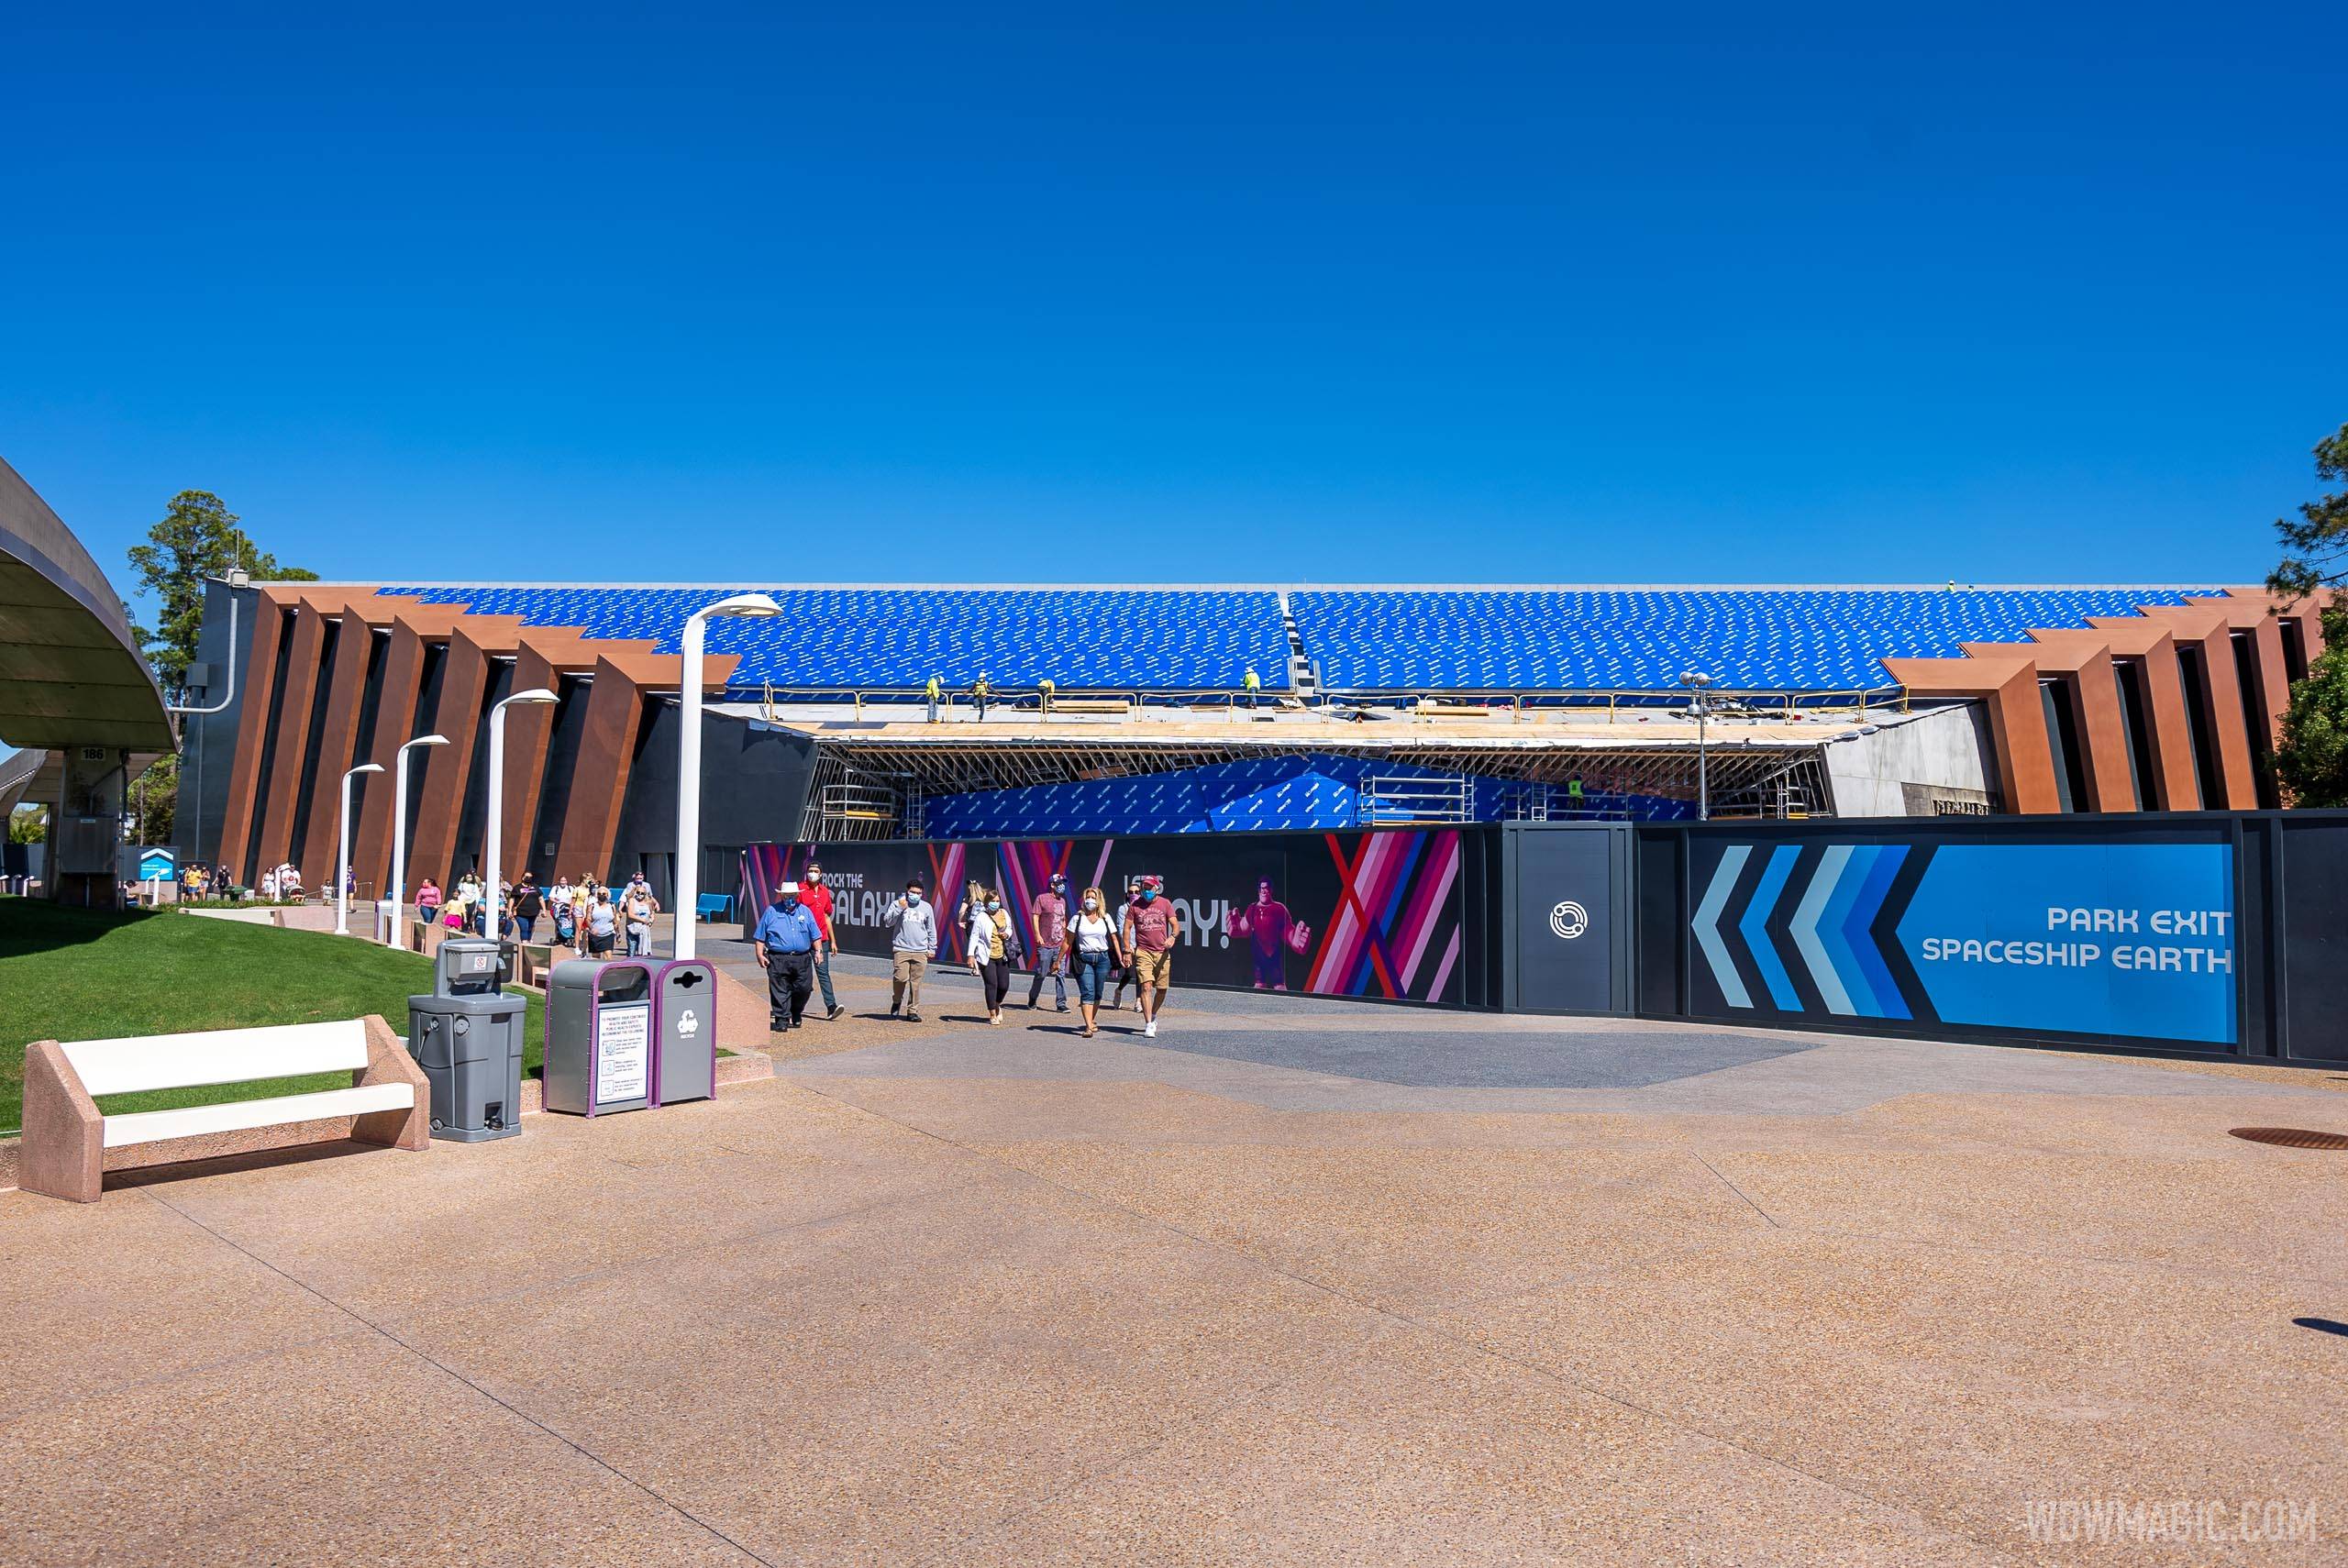 PHOTOS - EPCOT Guardians of the Galaxy Cosmic Rewind construction